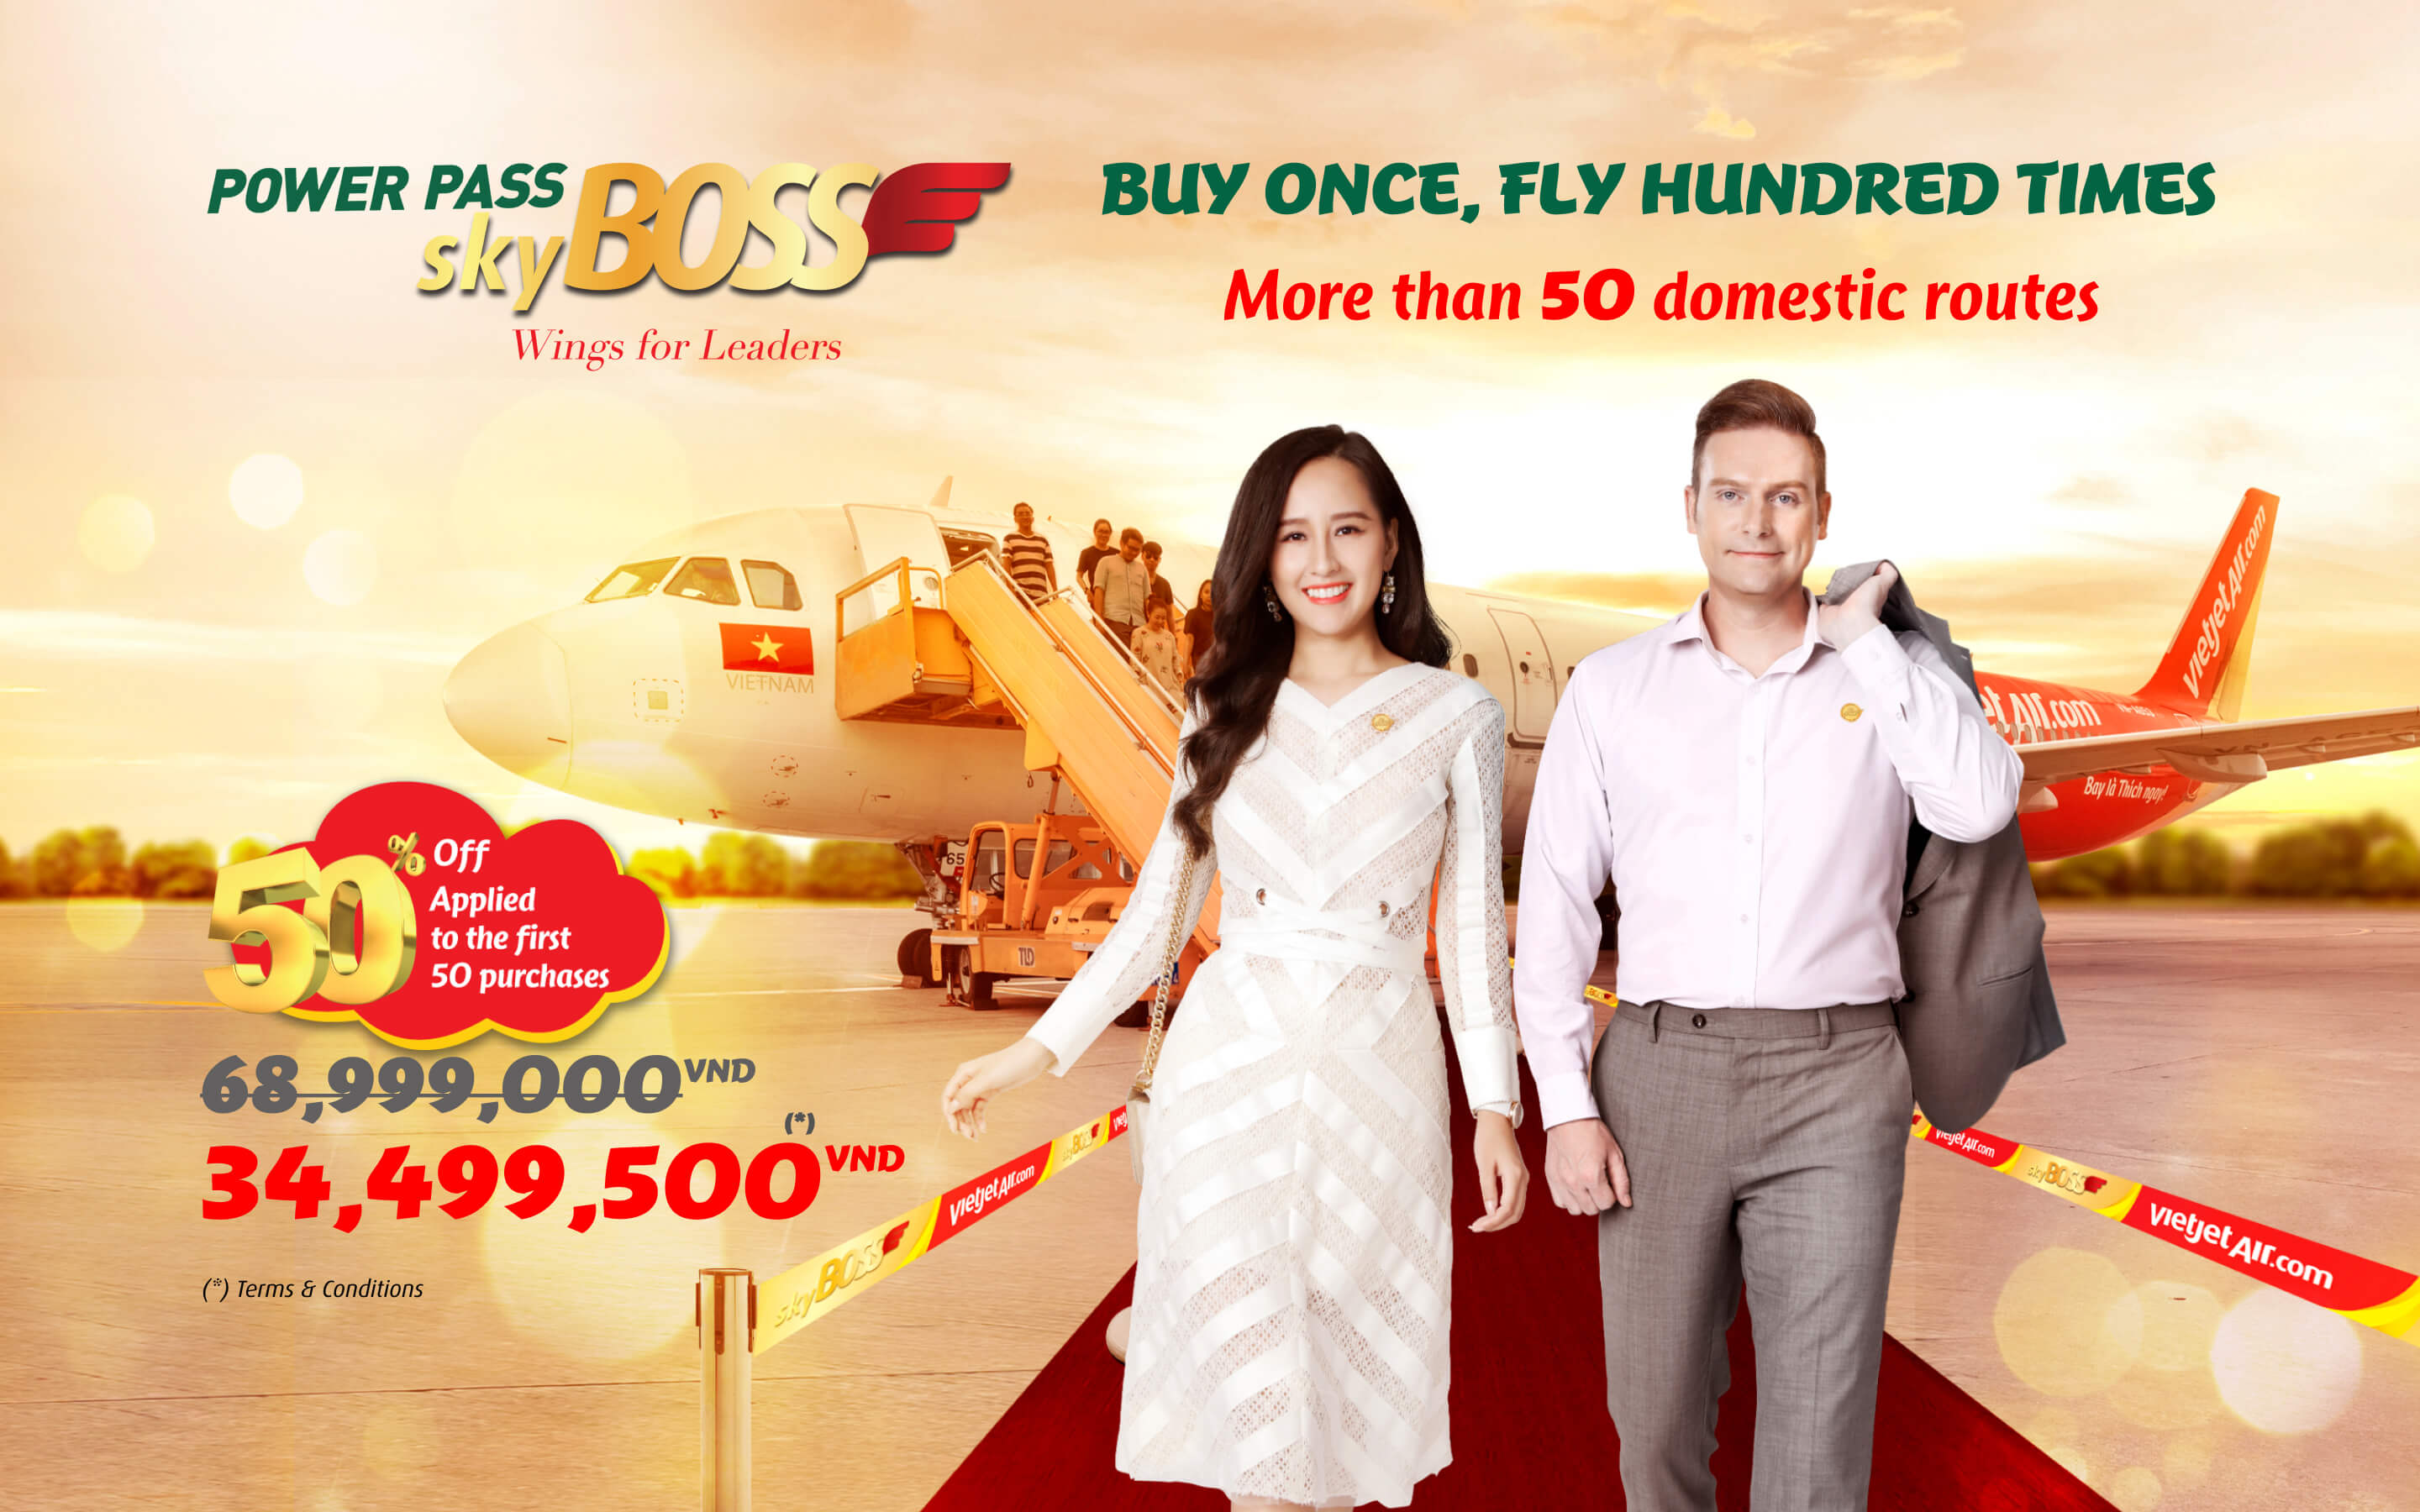 Power Pass - Buy one time, fly hundred times!